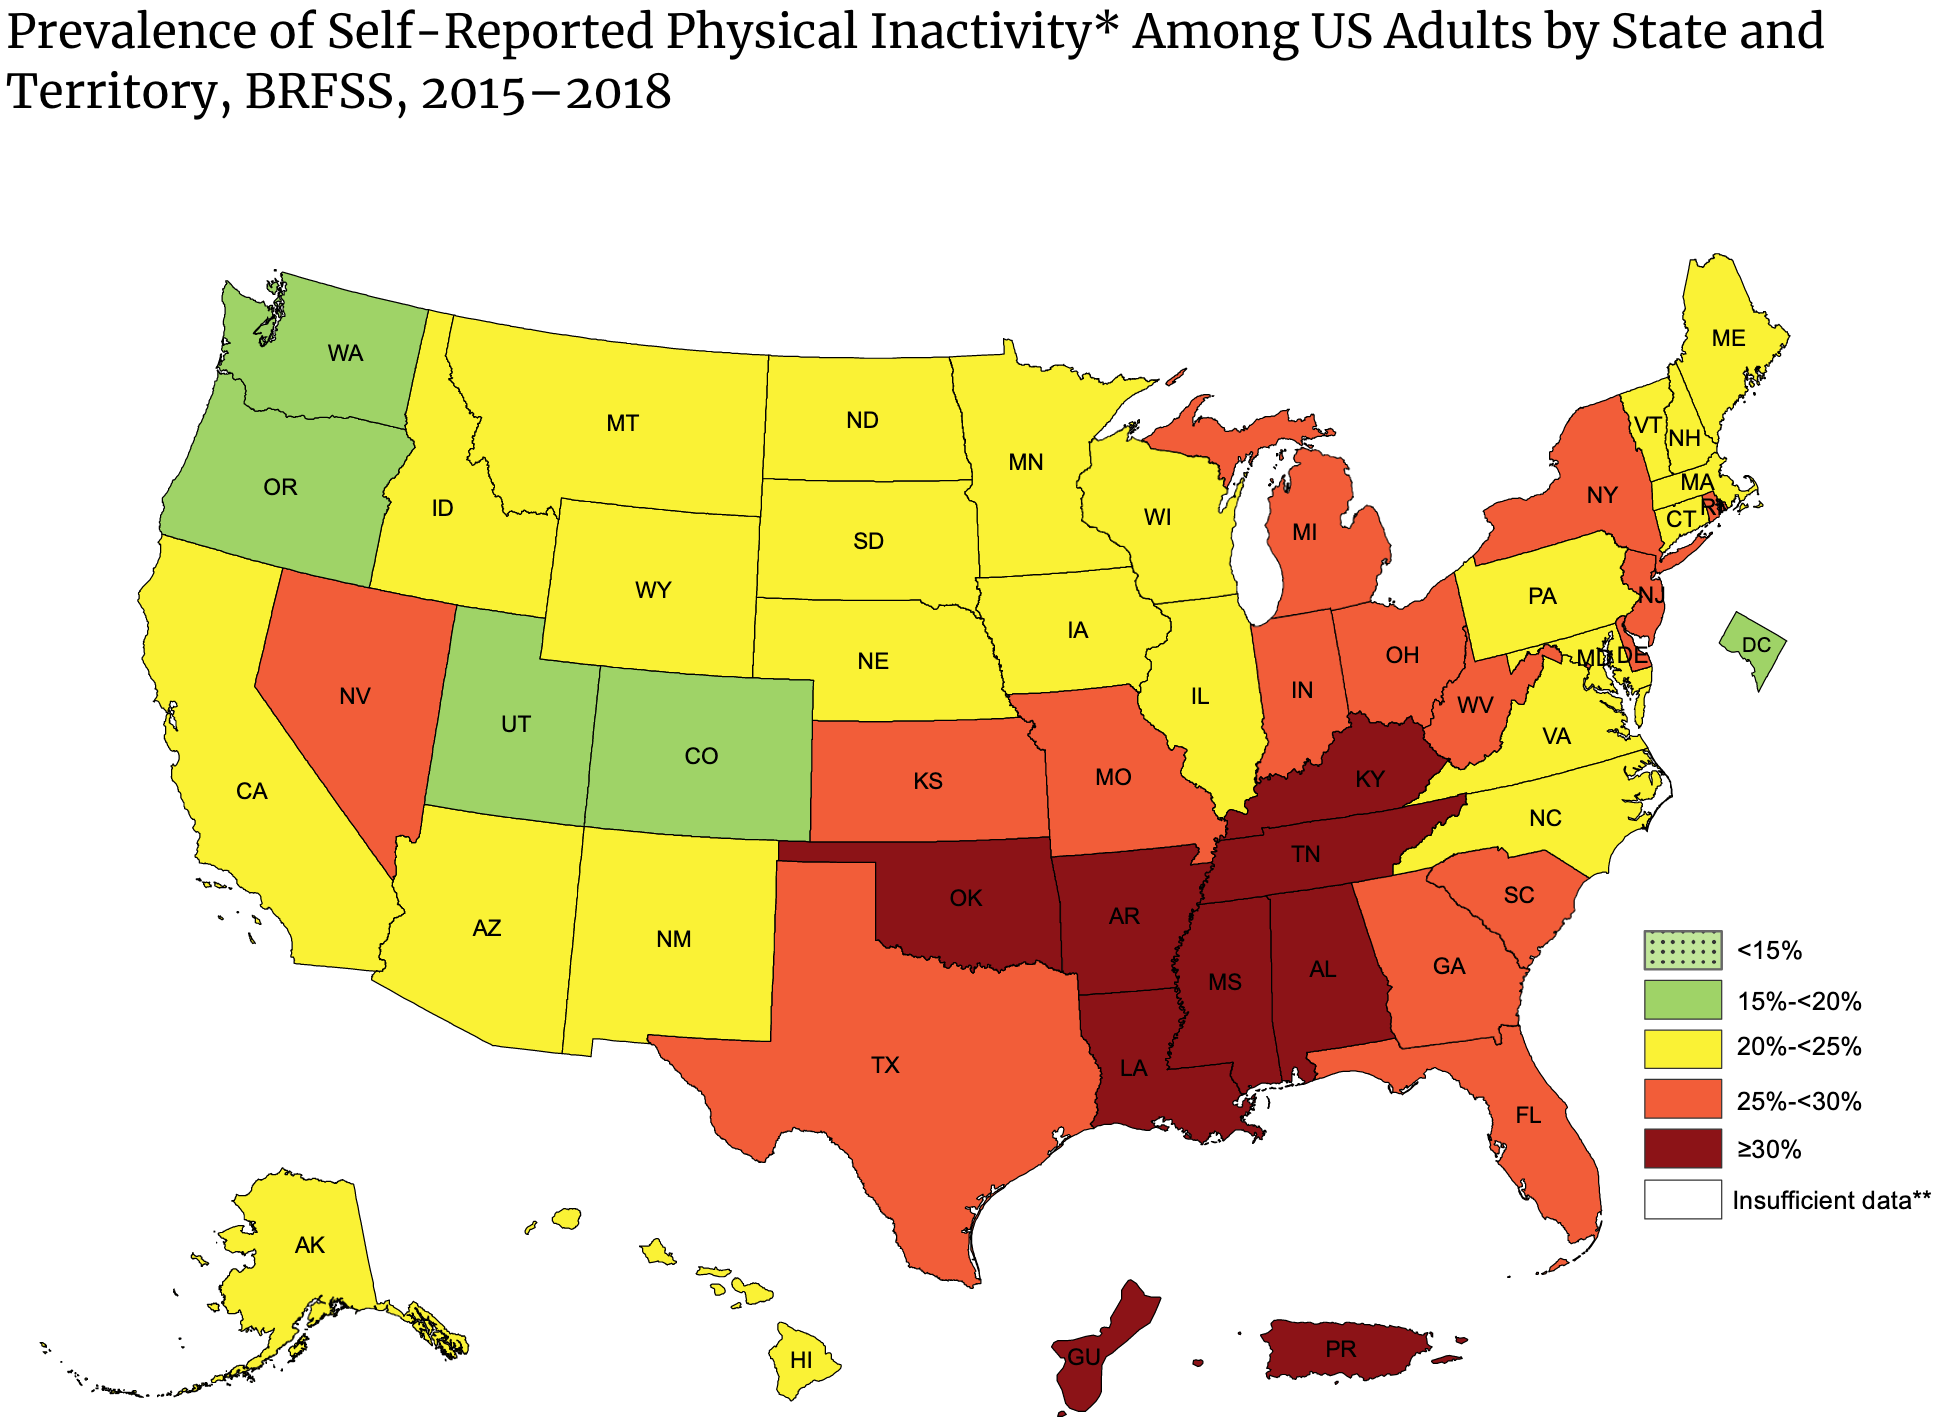 Prevalence of Self-Reported Inactivity Among US Adults by State and Territory